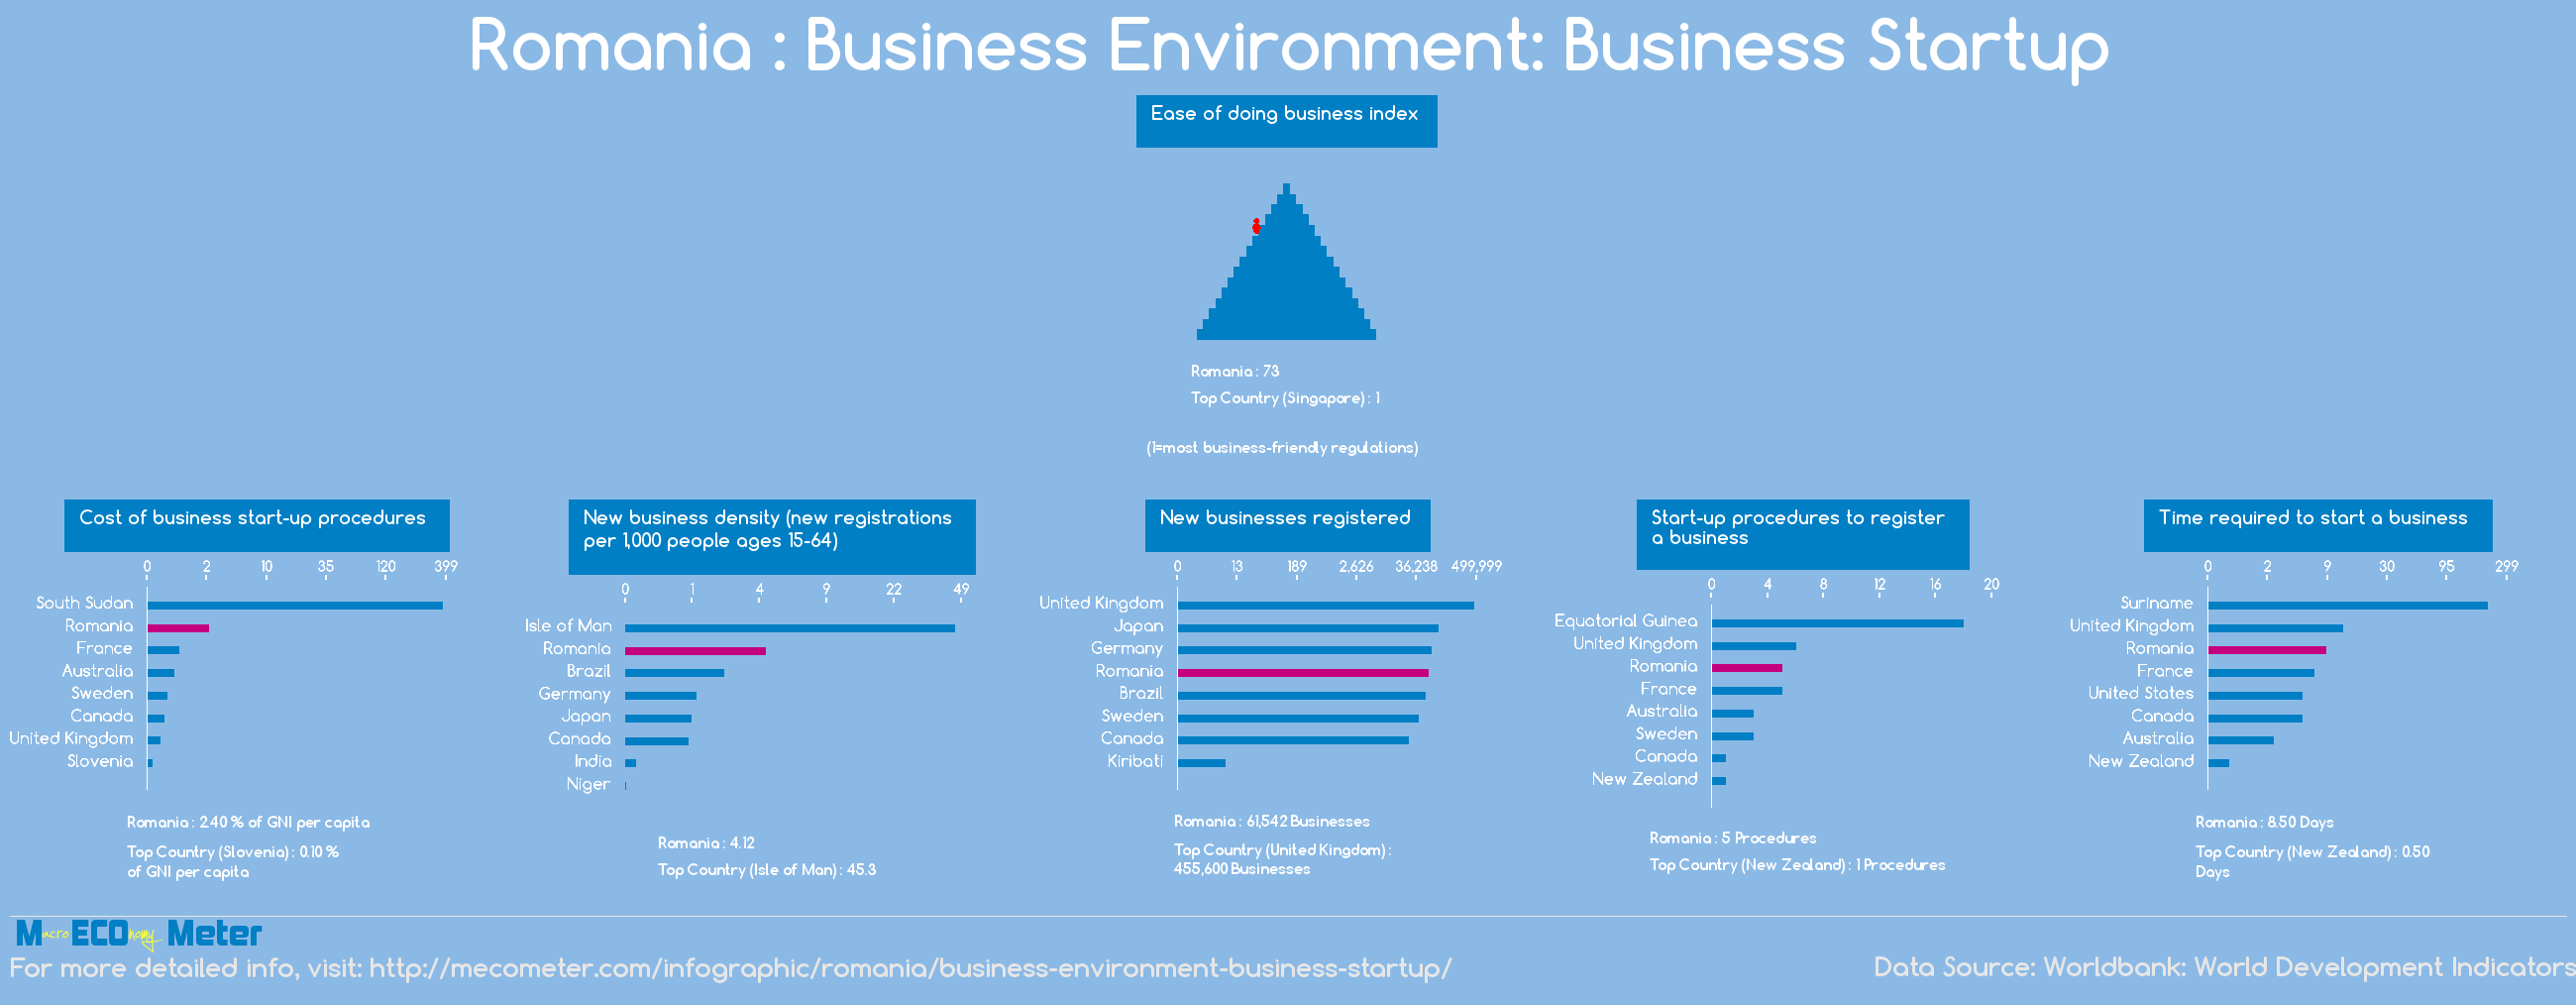 Romania : Business Environment: Business Startup